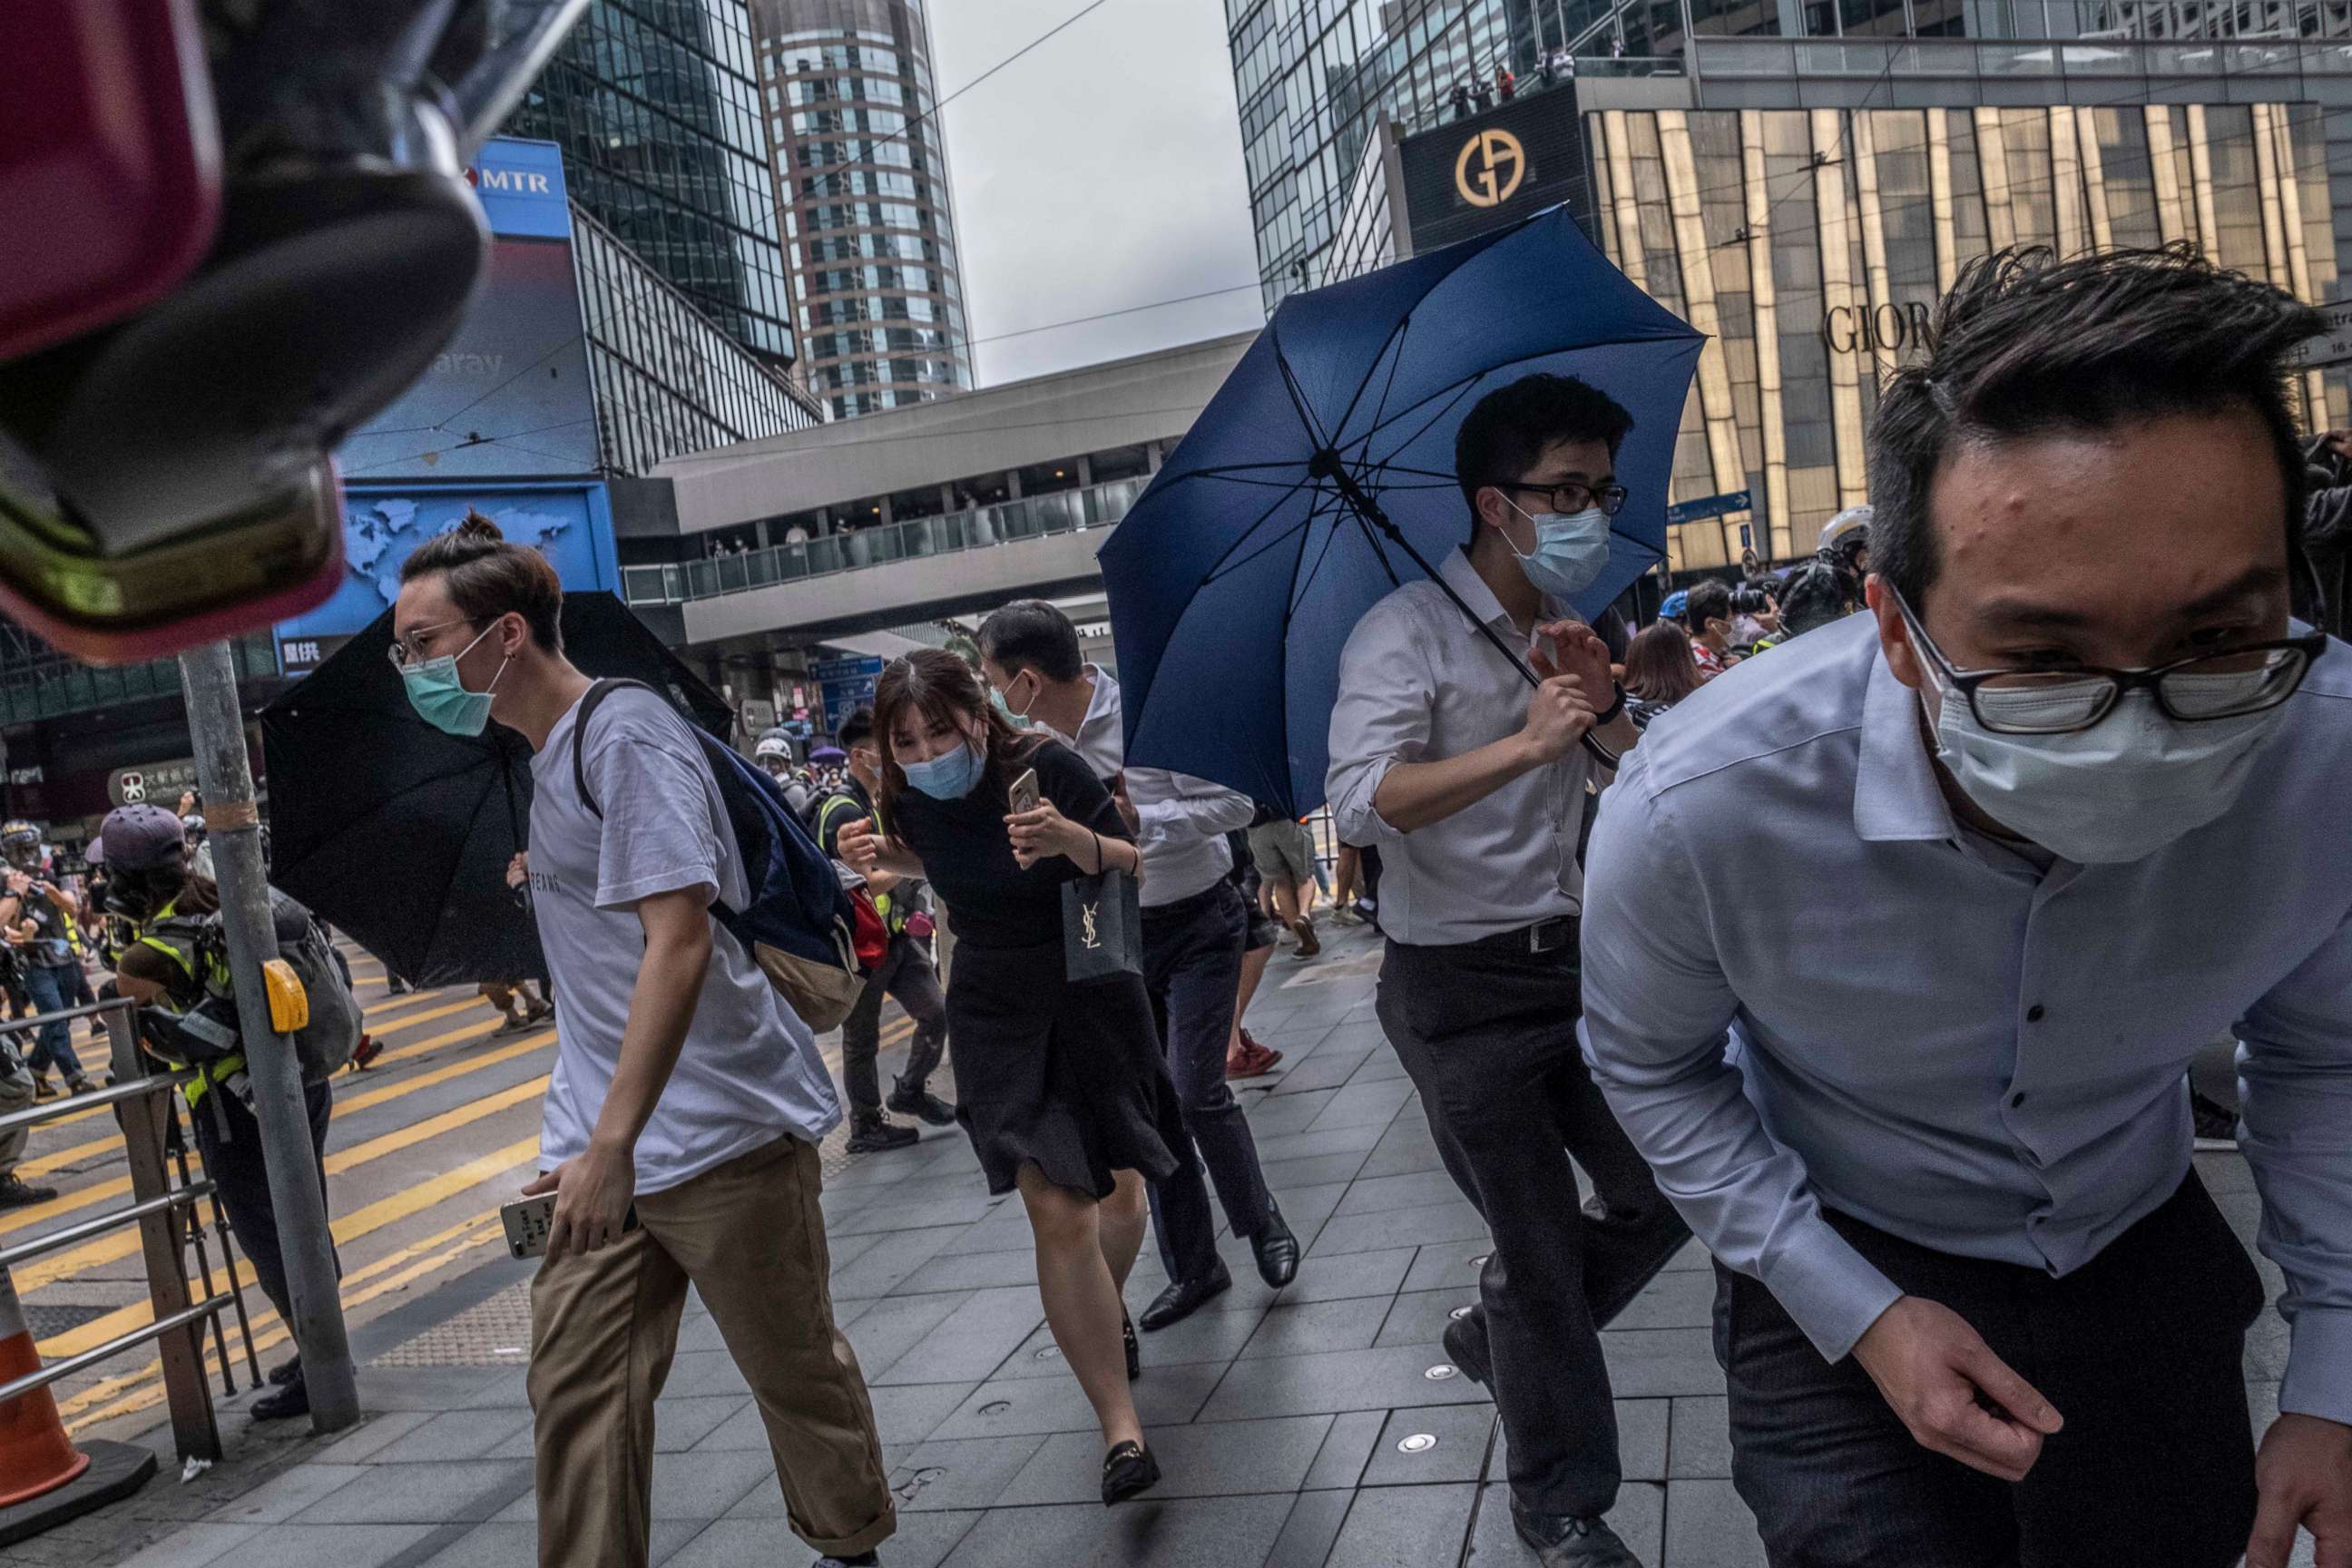 PHOTO: Protesters and bystanders crouched low after the police fired pepper balls in Central, a business district in Hong Kong, on Wednesday, May 27, 2020.